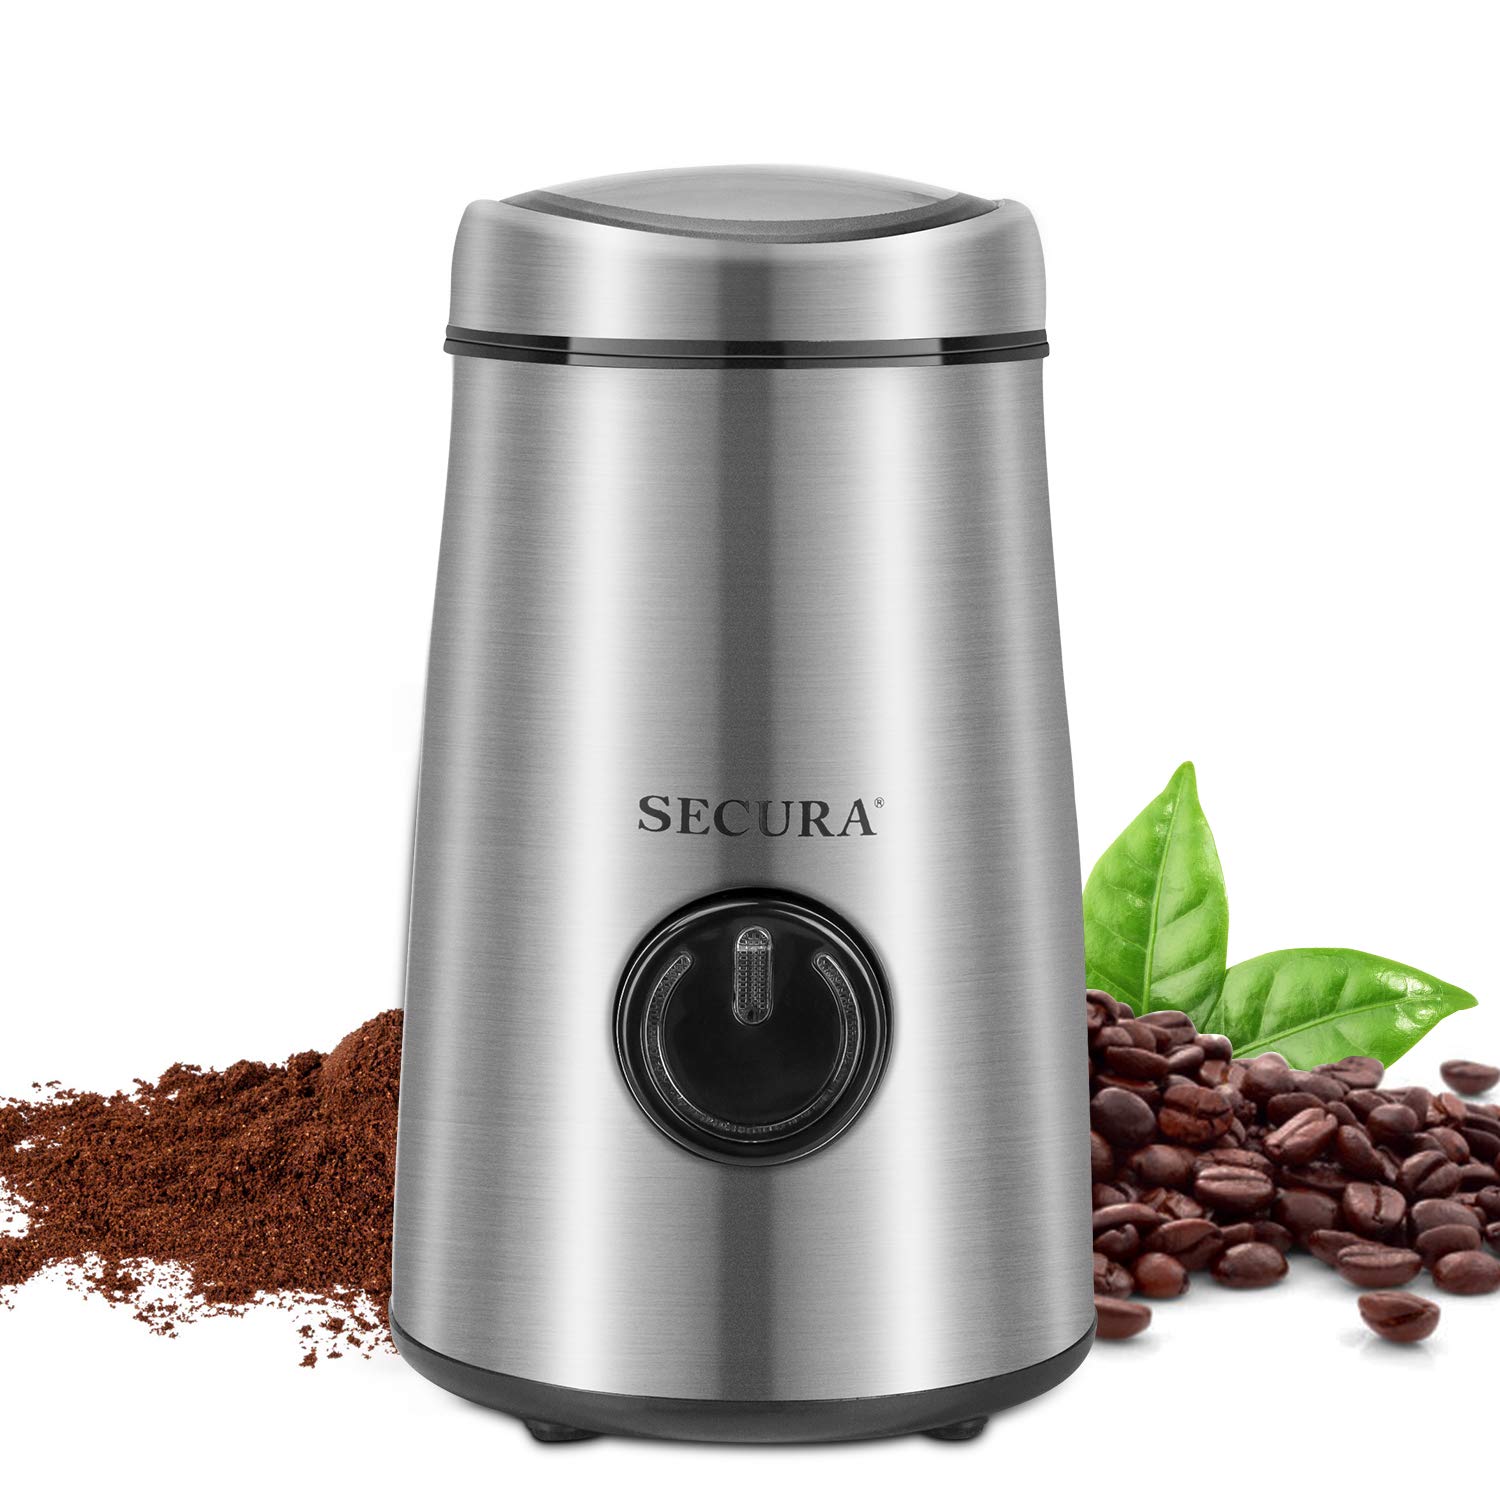 Secura Stainless Steel Coffee Bean Grinder Electric Quiet High Speed Silver New 